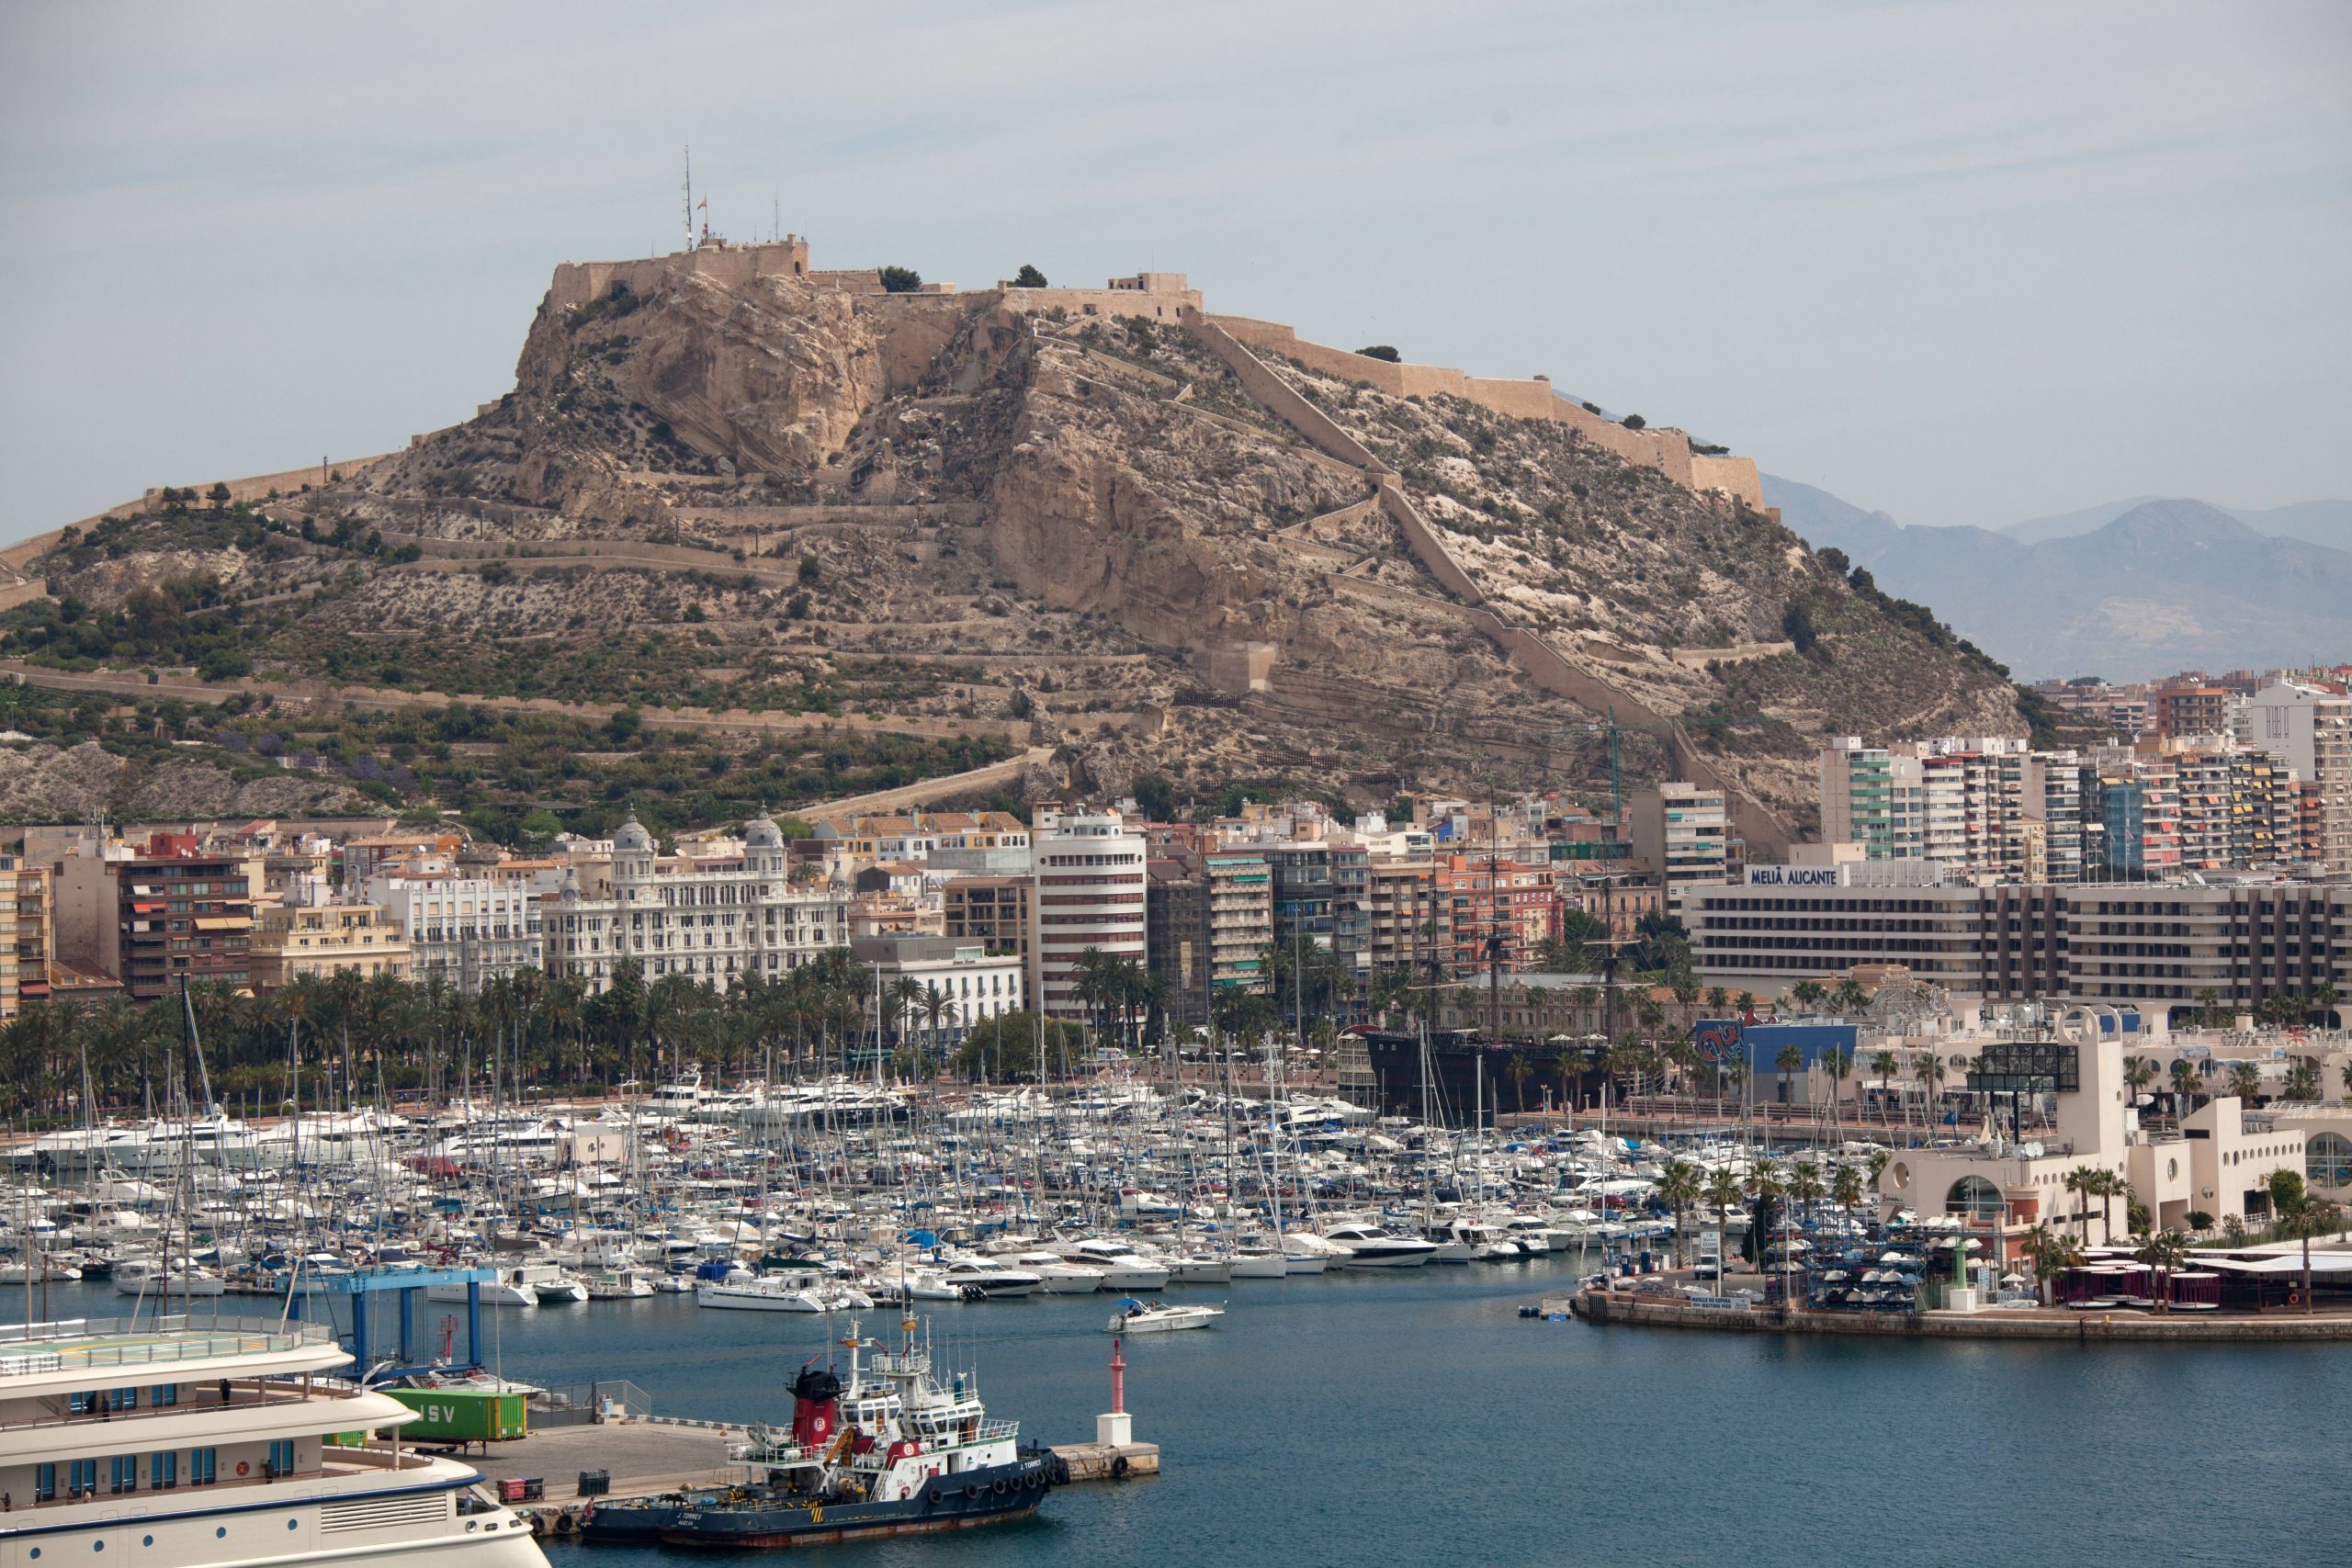 Cruise ship passengers reveal what they like most about Spain's Alicante